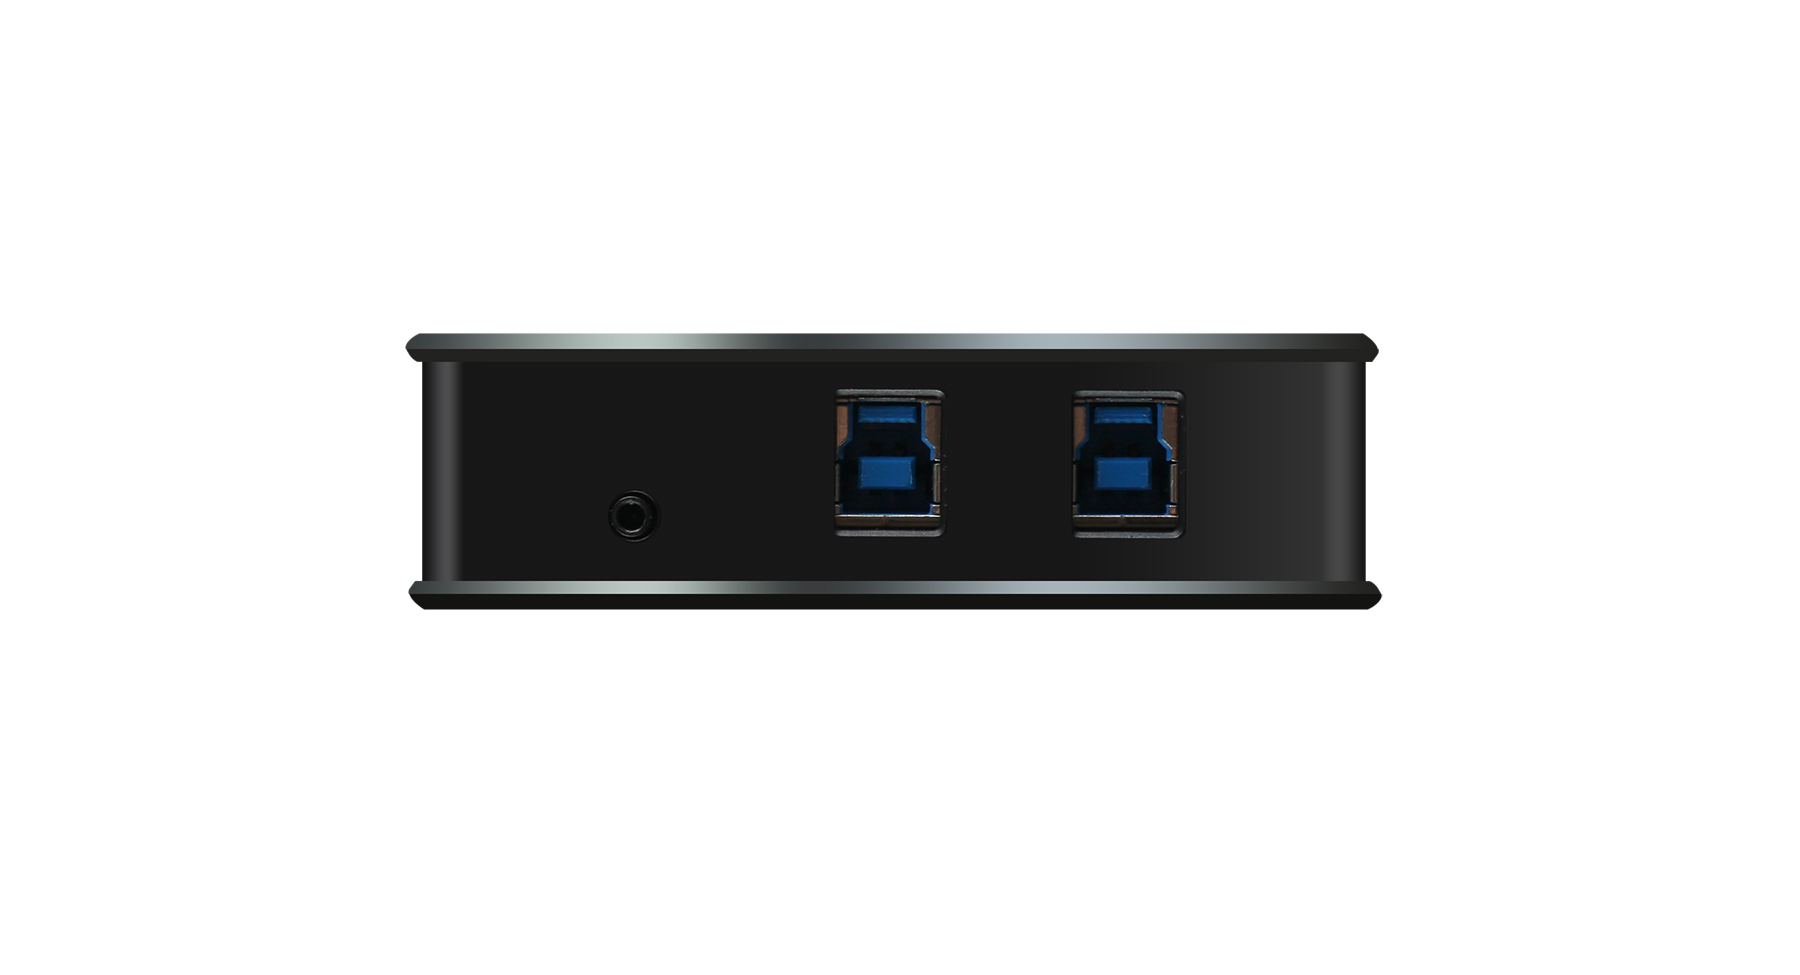 IOGEAR - GUS432CA1KIT - 2x4 USB 3.0 Peripheral Sharing Switch with